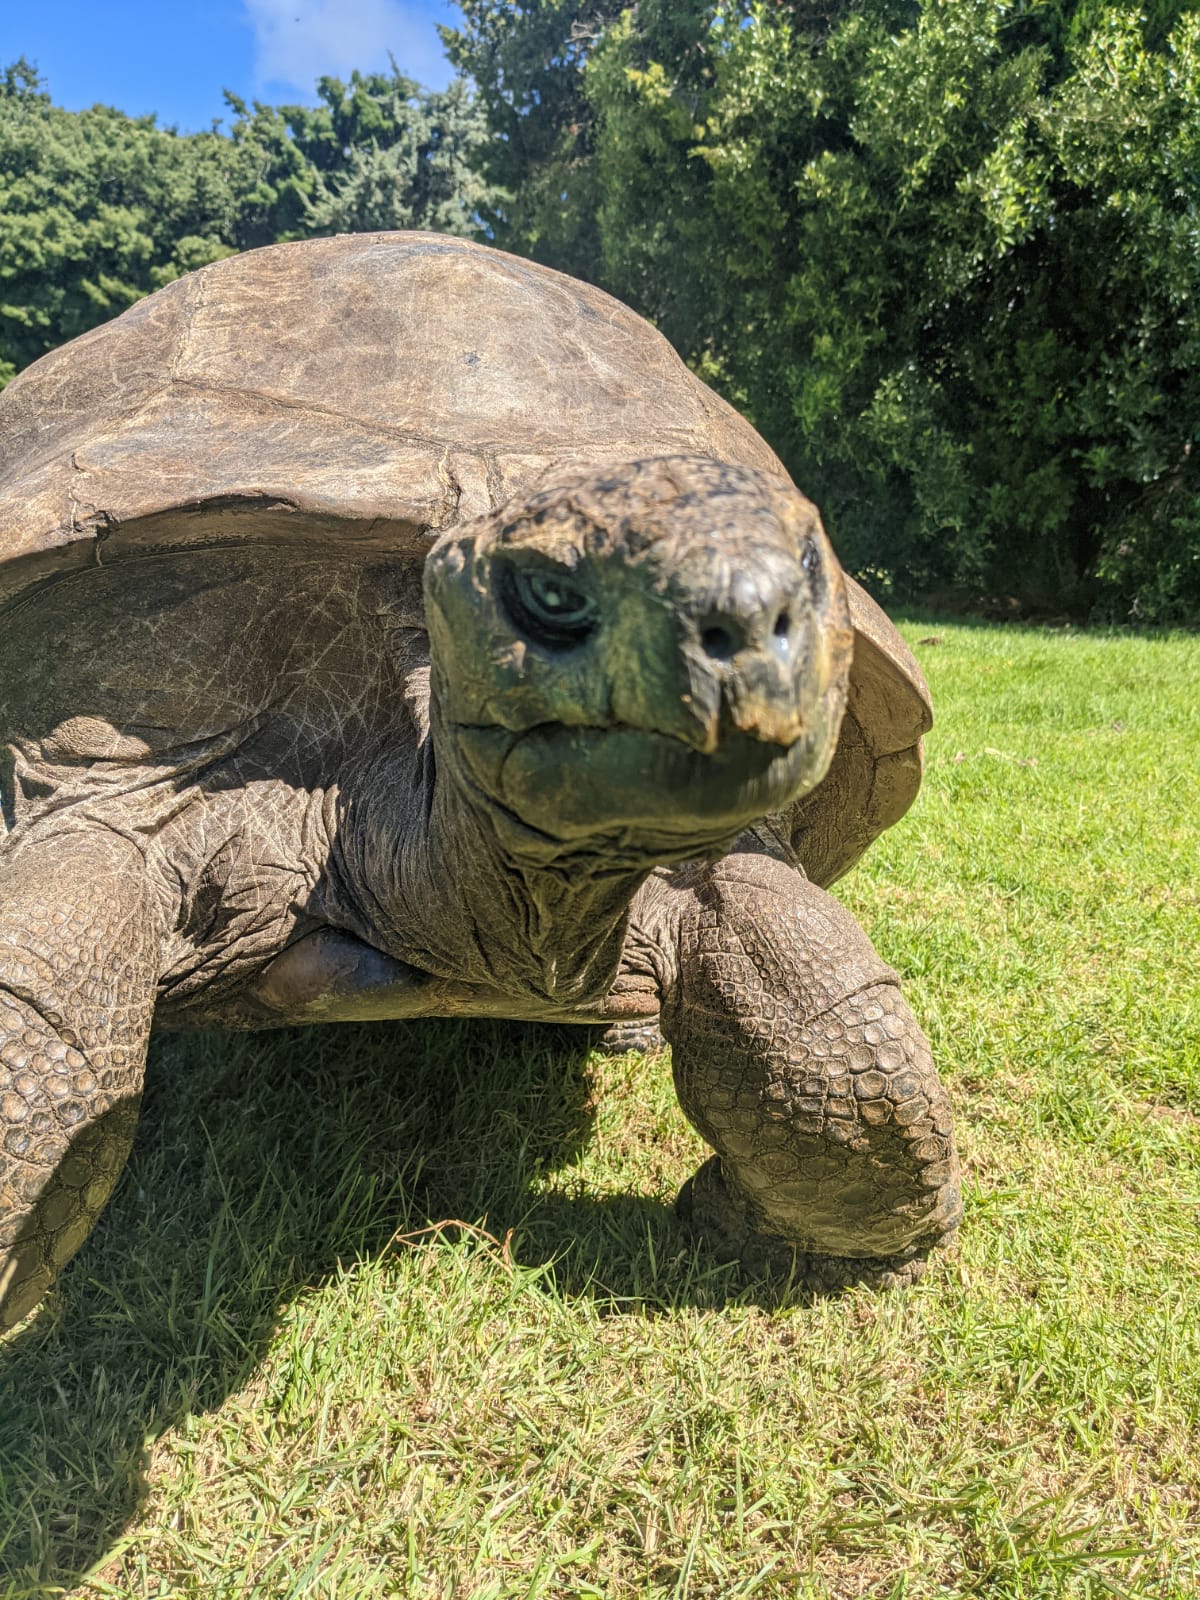 What is the oldest living tortoise in the world?